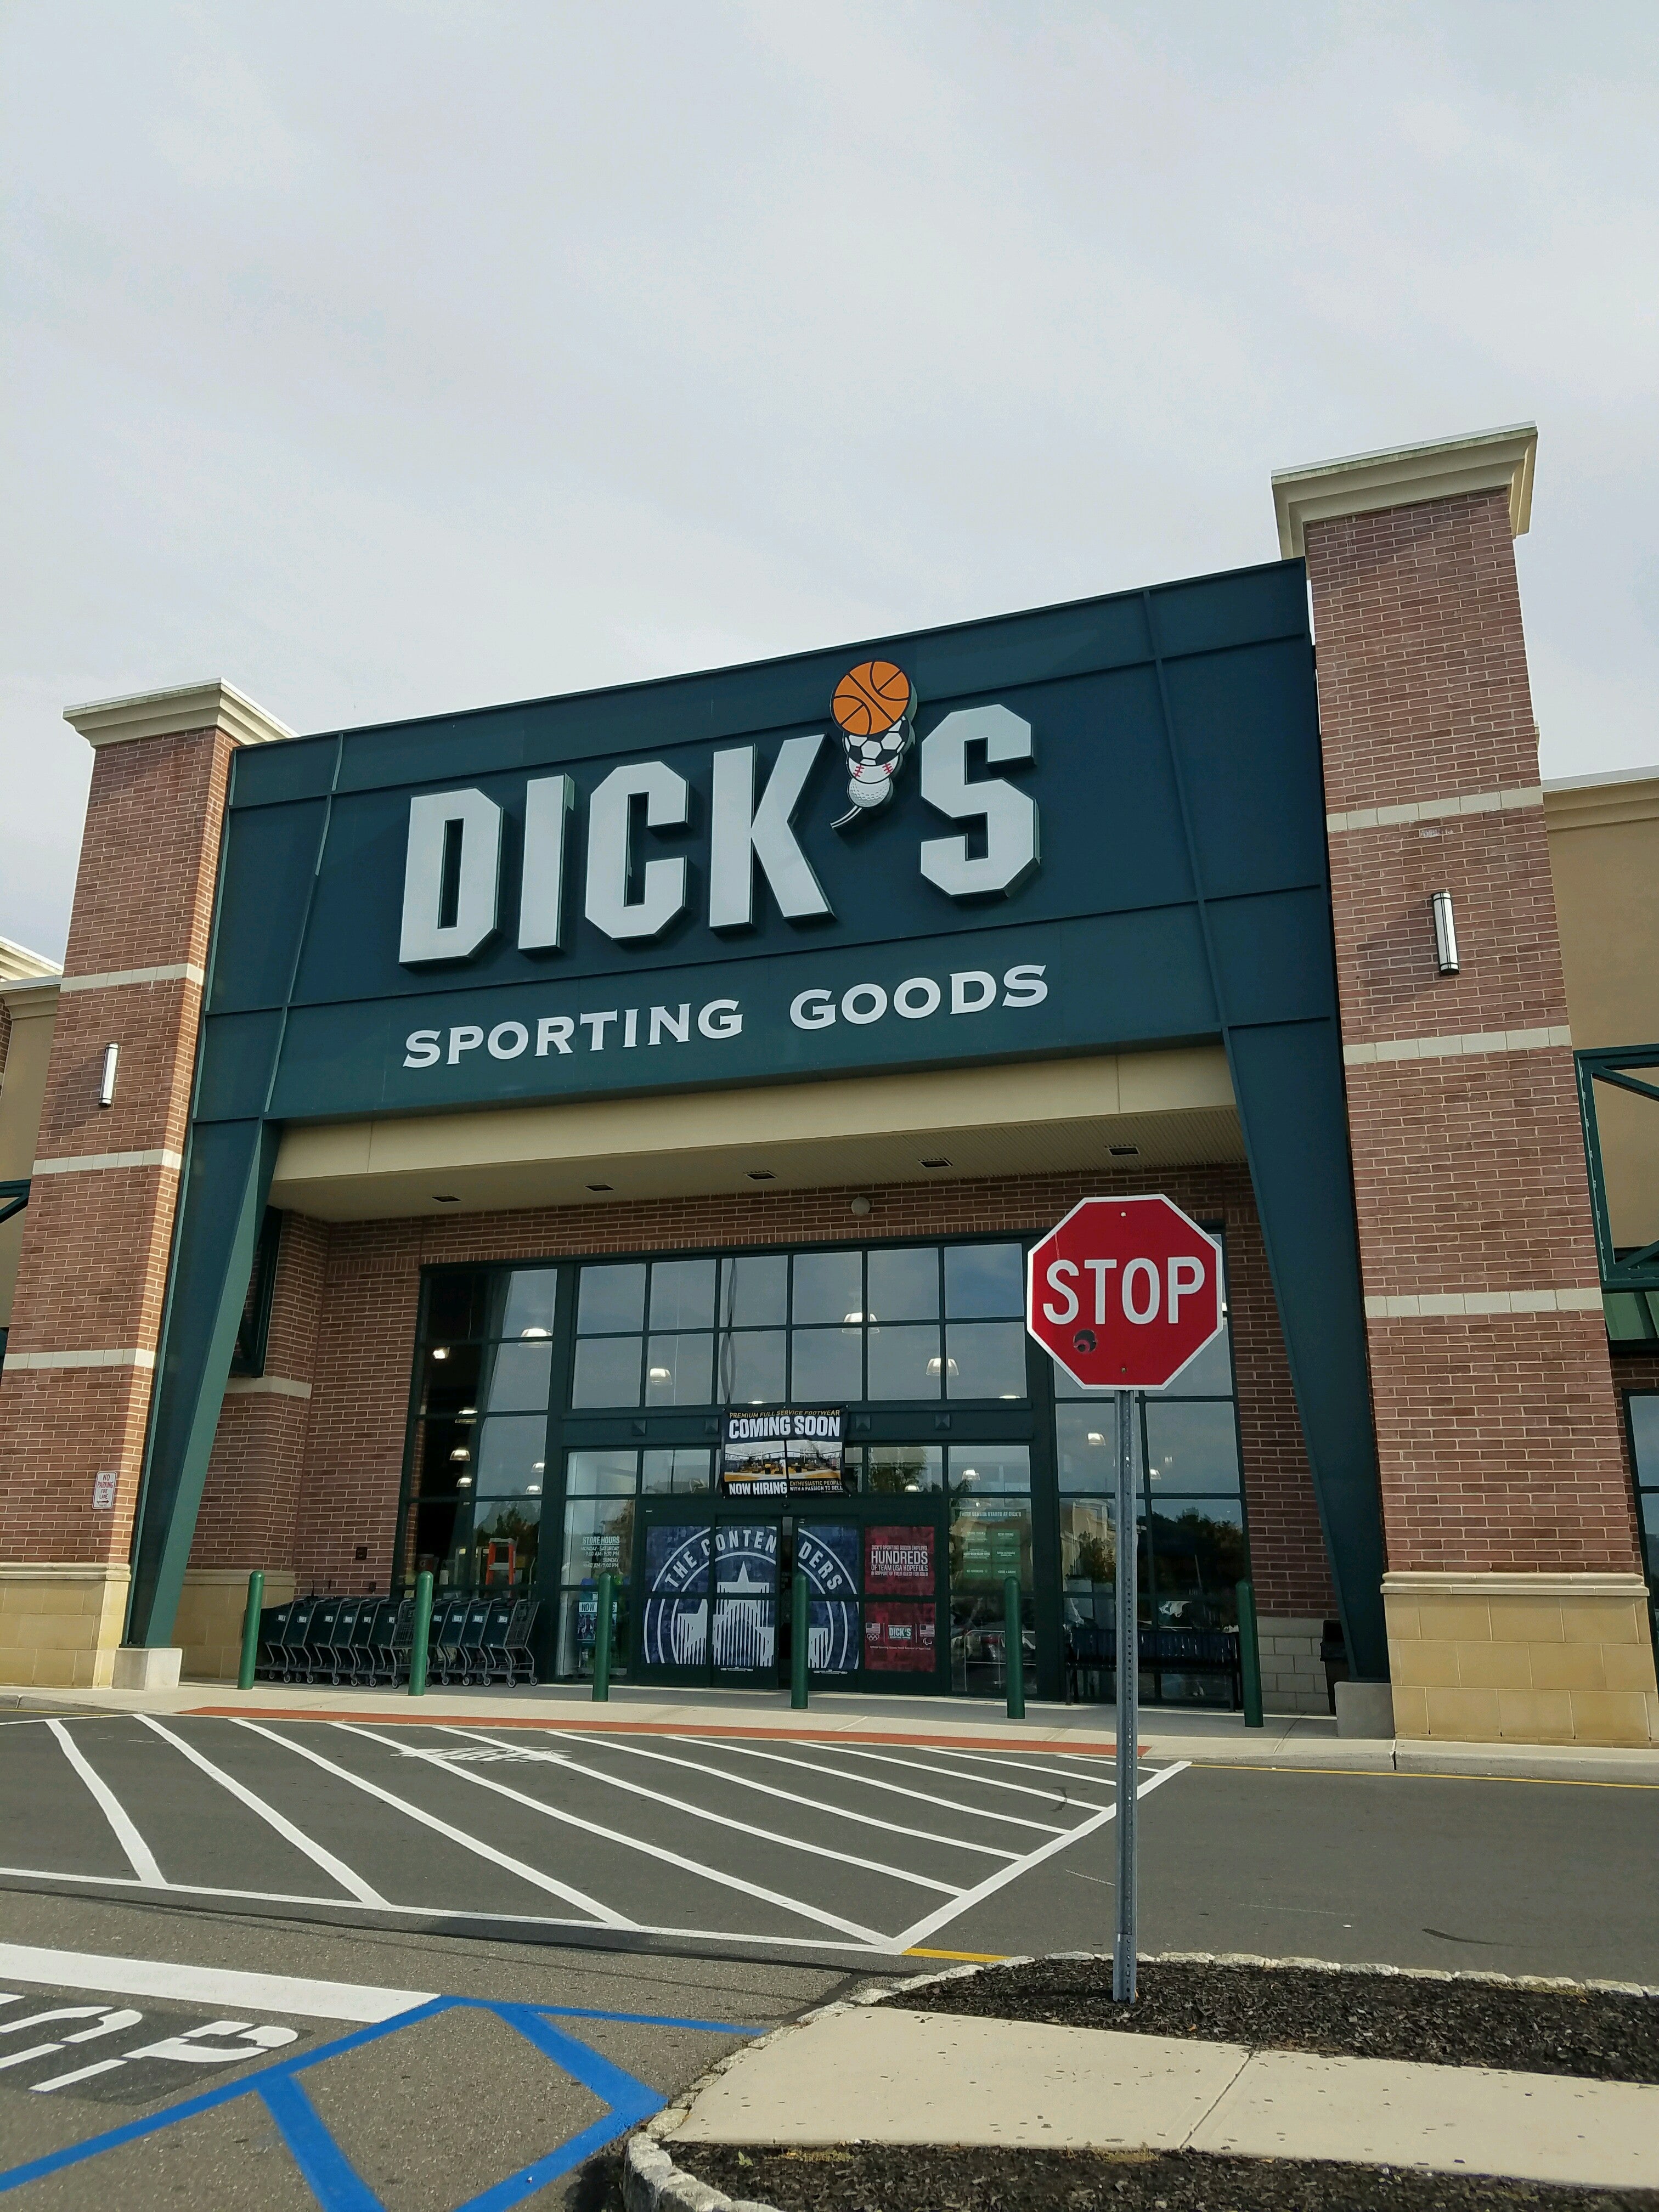 DICK'S SPORTING GOODS - 79 Photos & 242 Reviews - 3265 Sports